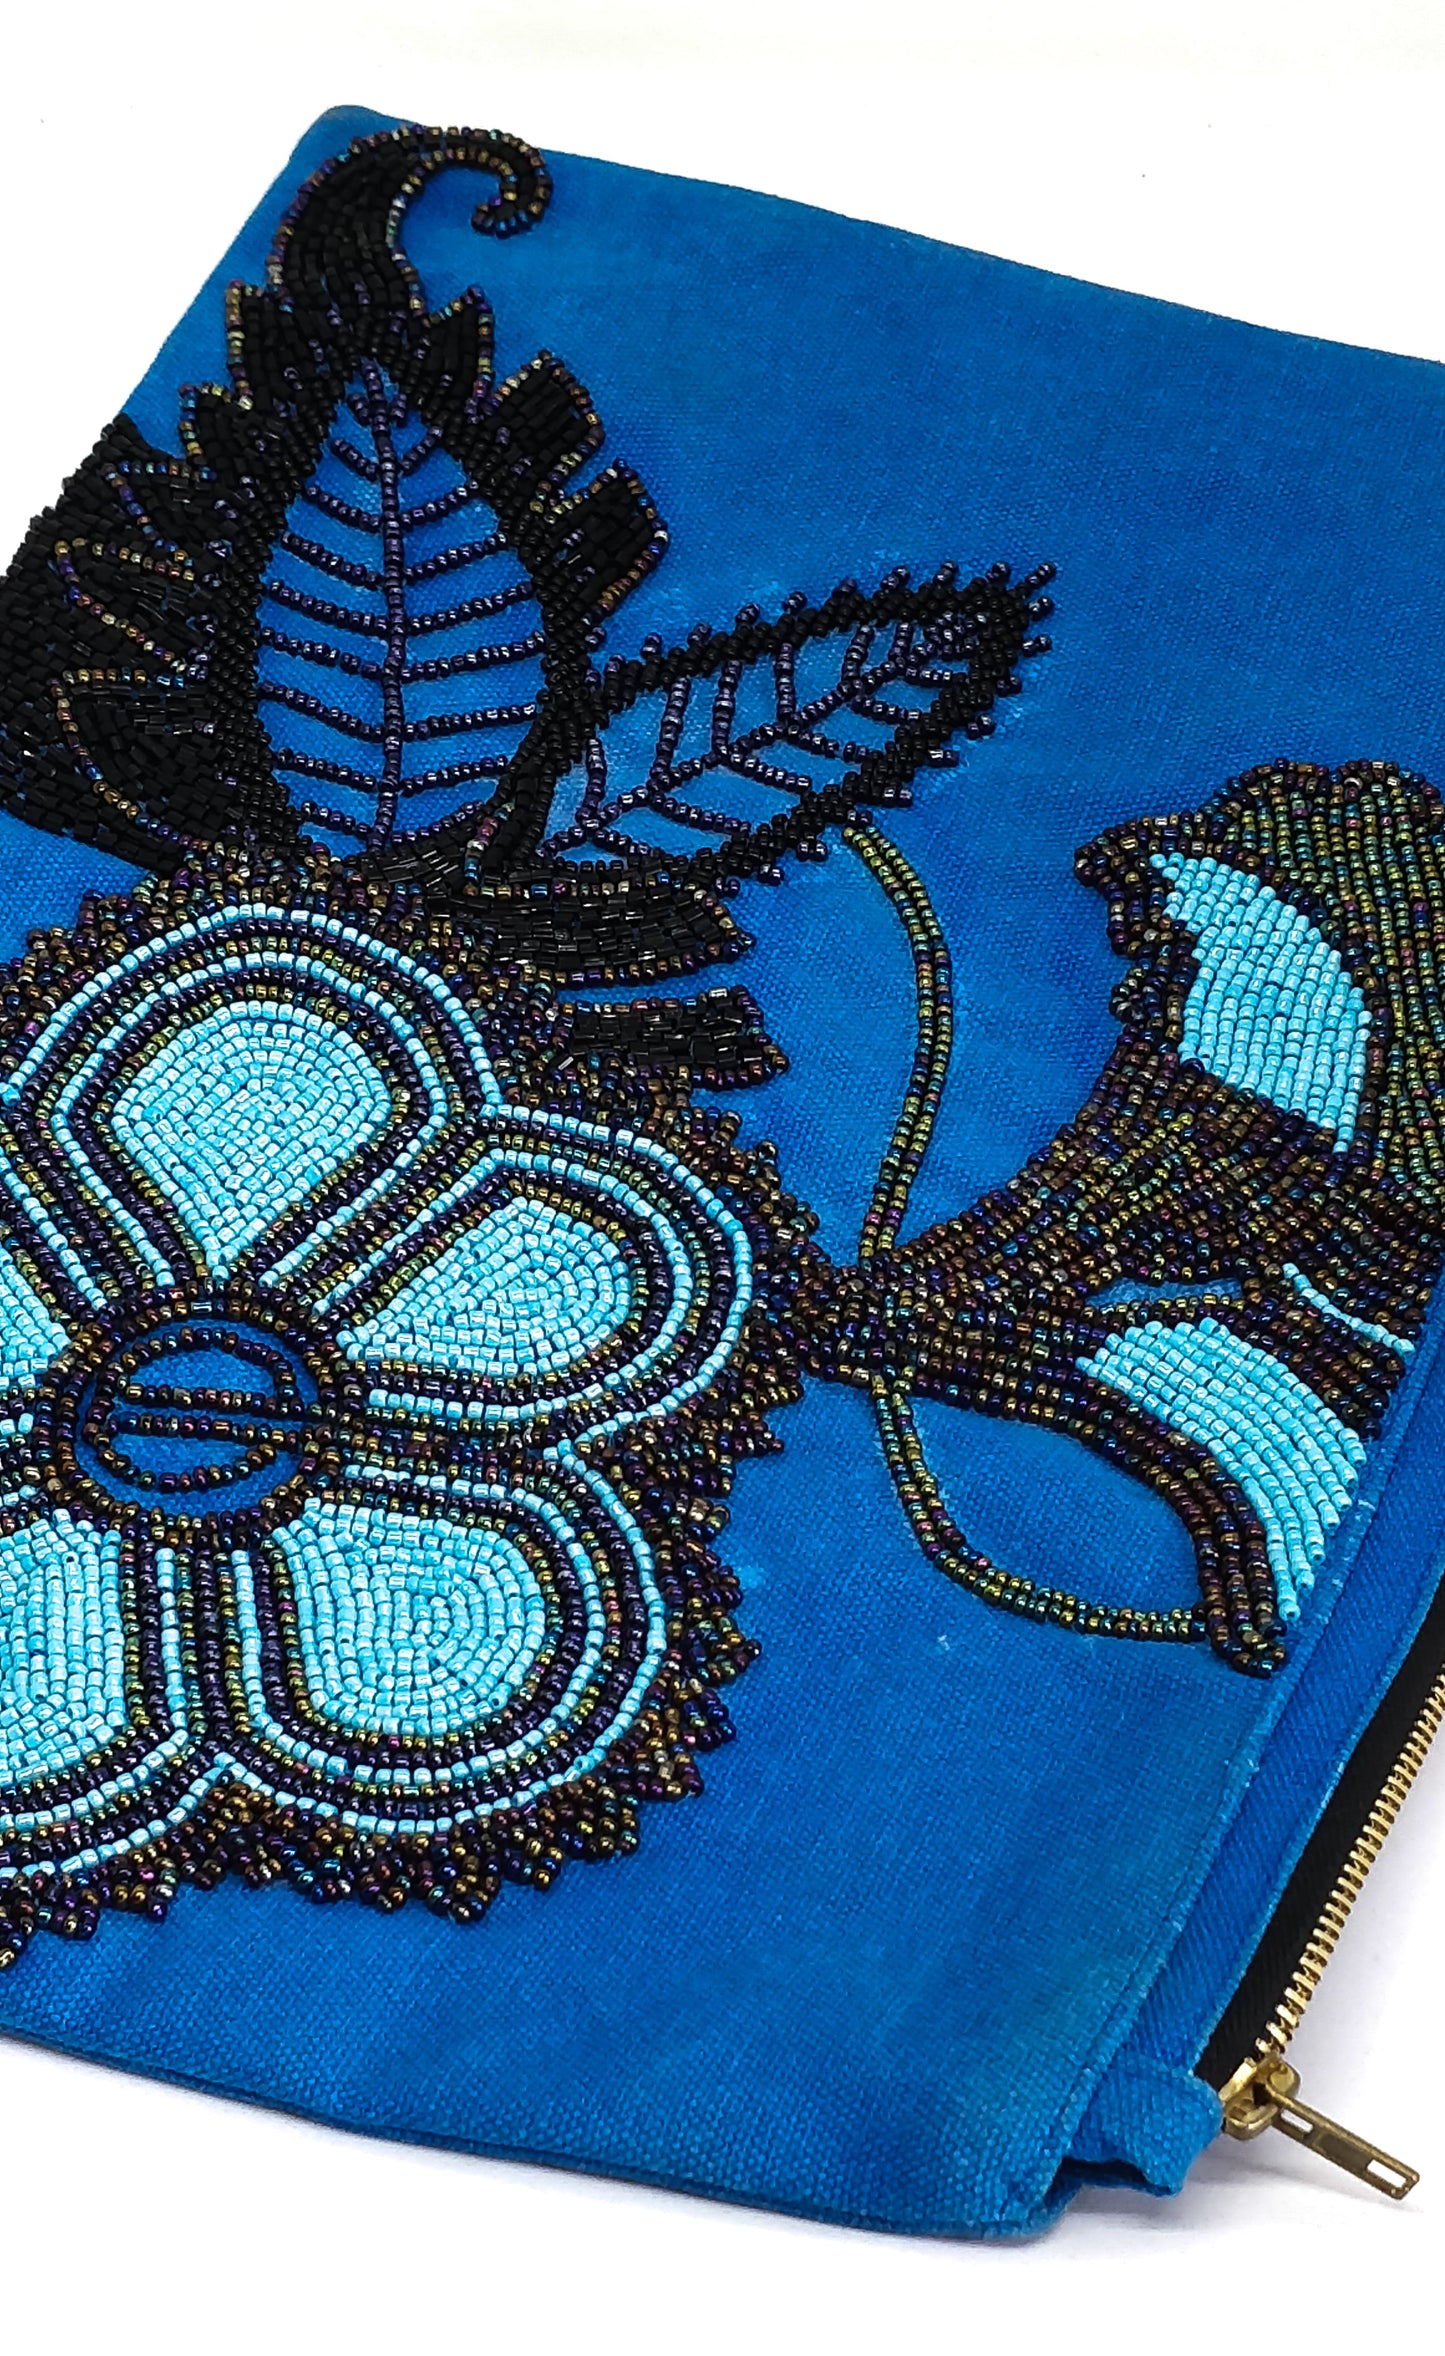 Multi Purpose Blue Canvas Embroidered Bead Pouch Cover